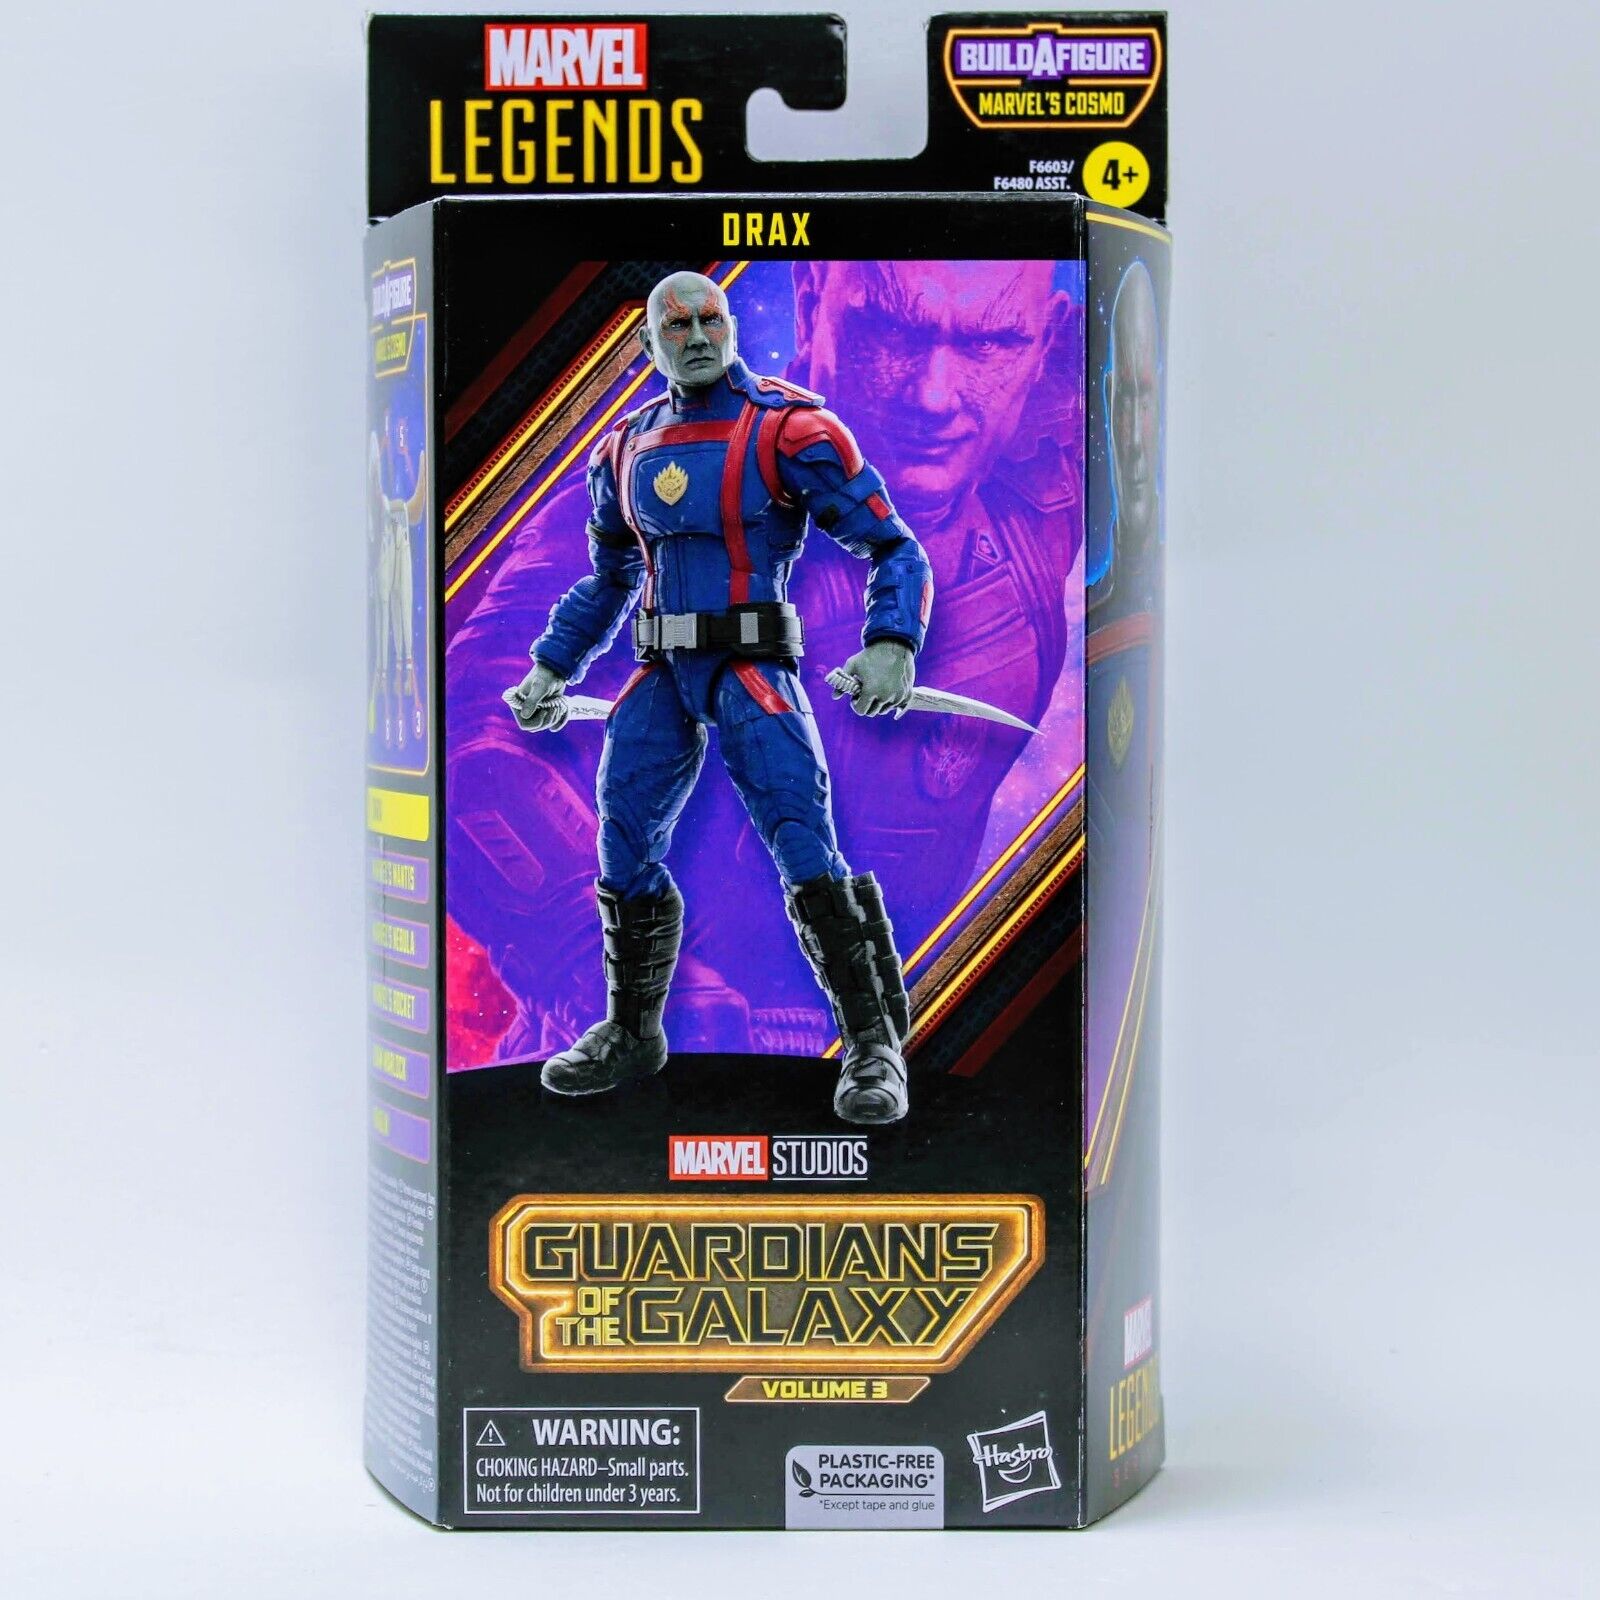 Marvel Legends Drax Guardians of the Galaxy Vol. 3 Movie - Cosmo BAF 6" Figure